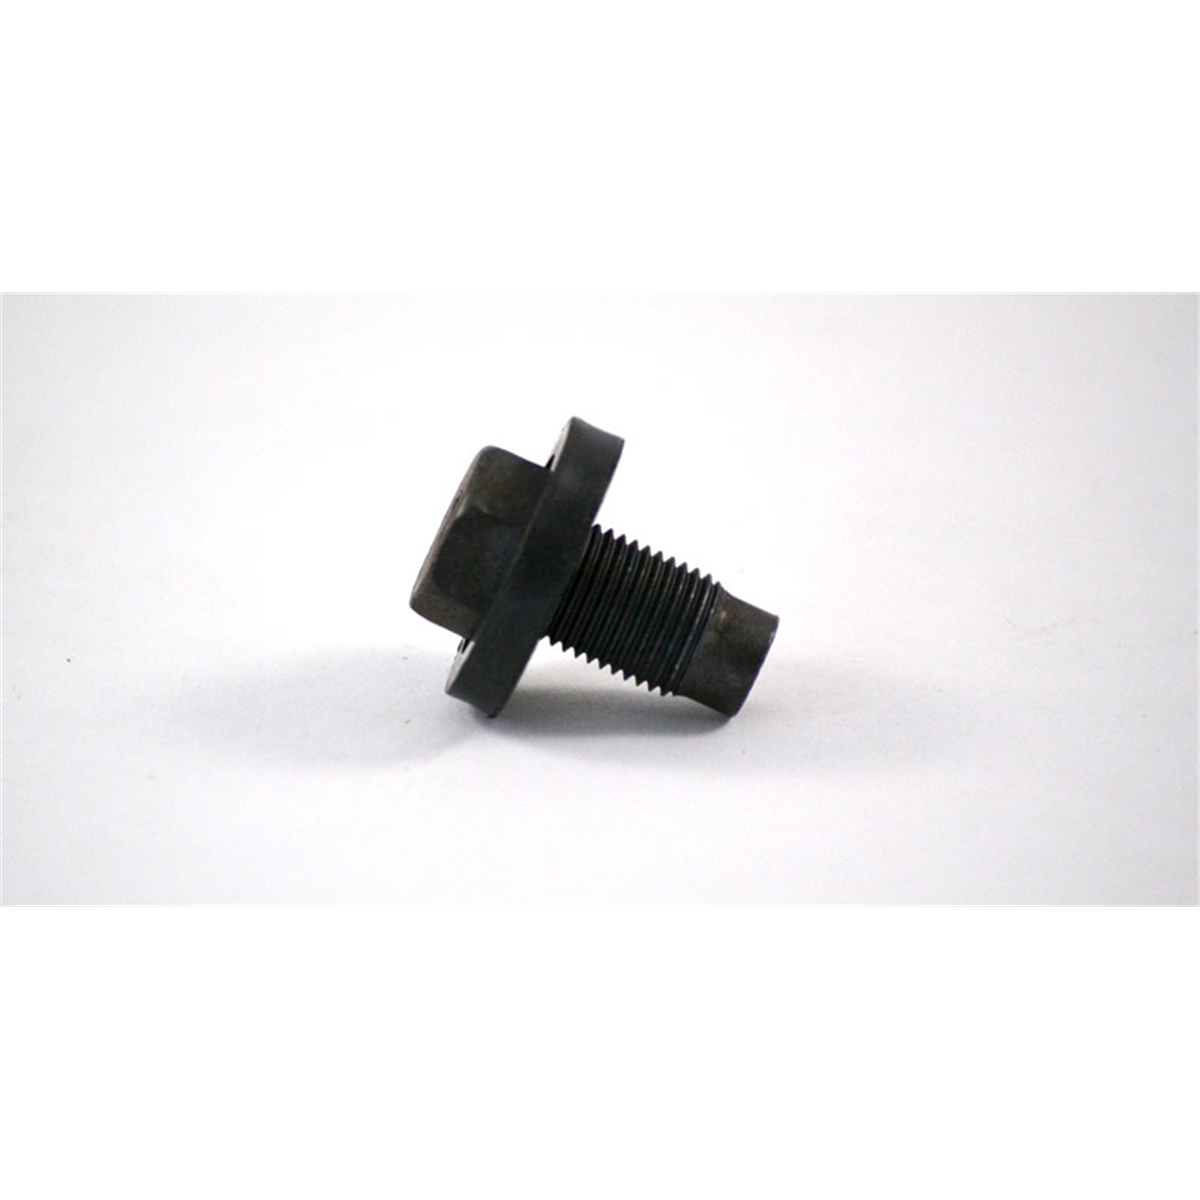 1/2 DRAIN PLUG - 20 WITH MOLDED RUBBER WASHER